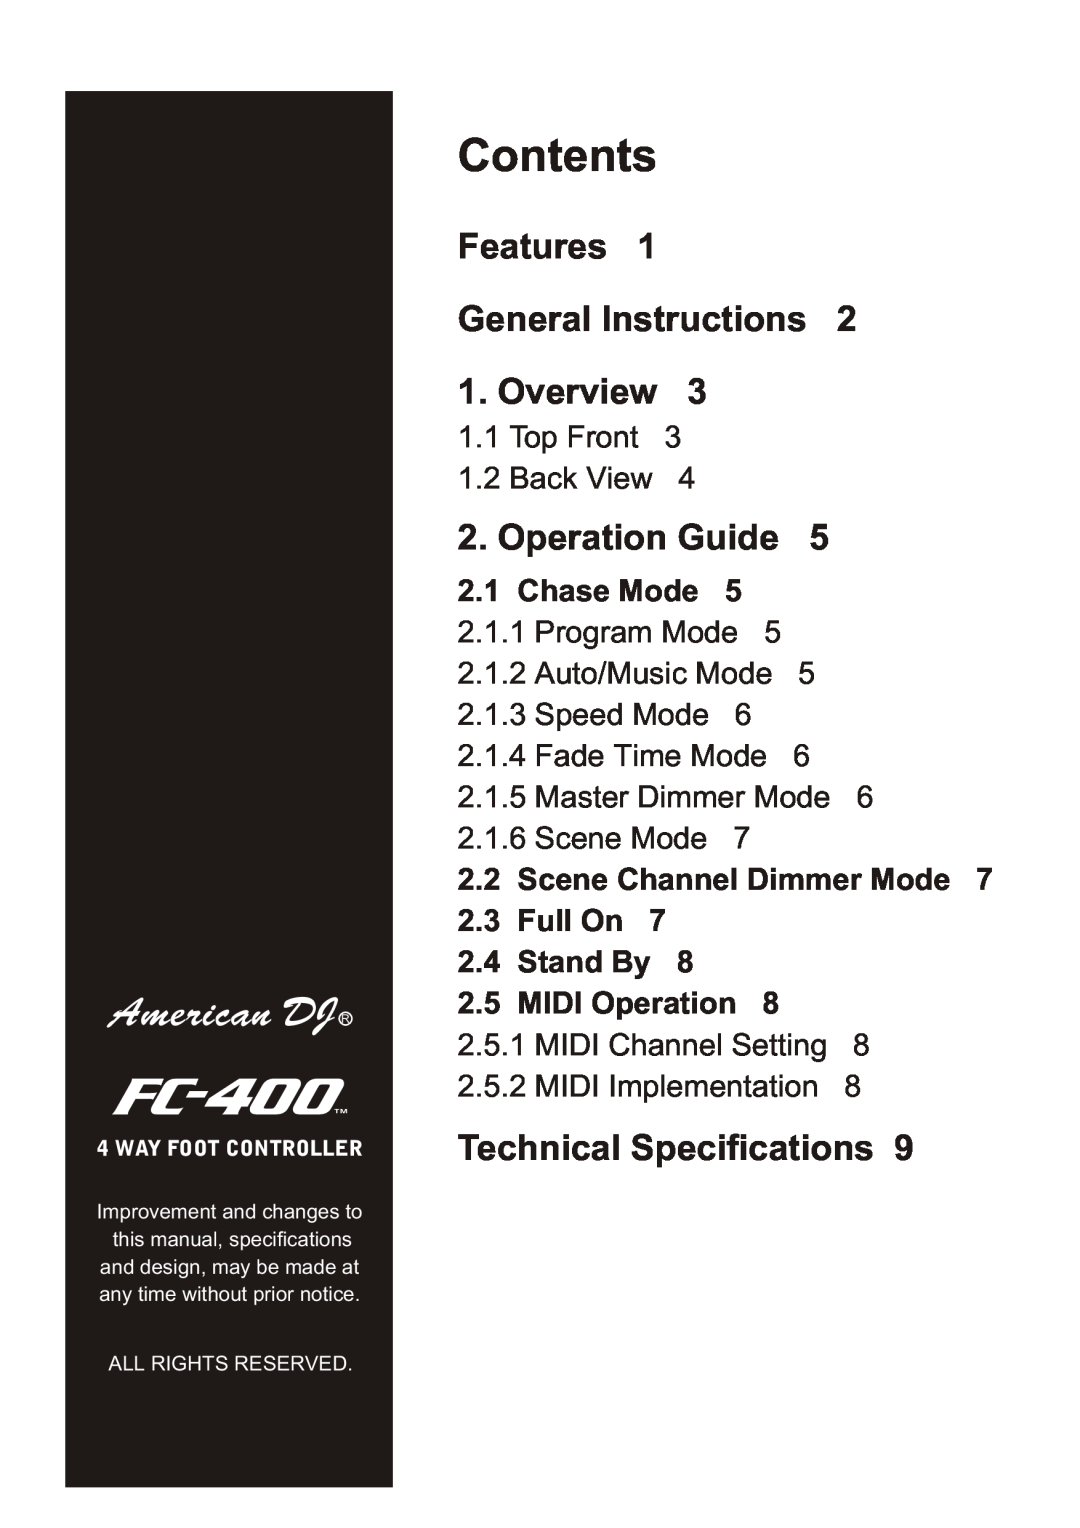 American DJ FC 400 Features General Instructions 1. Overview, Operation Guide, Top Front 1.2 Back View, FC-400 TM 